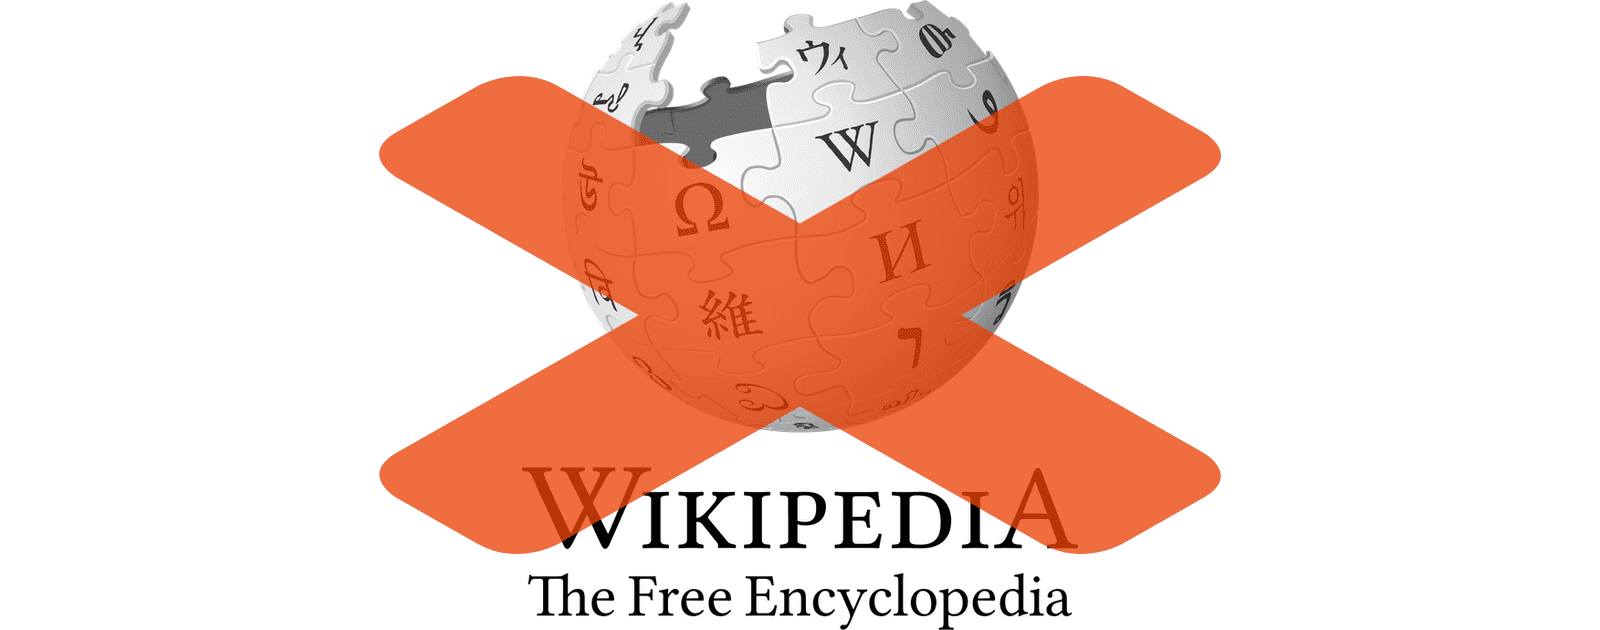 Italy Wikipedia Shuts Down in Protest of EU Copyright Law